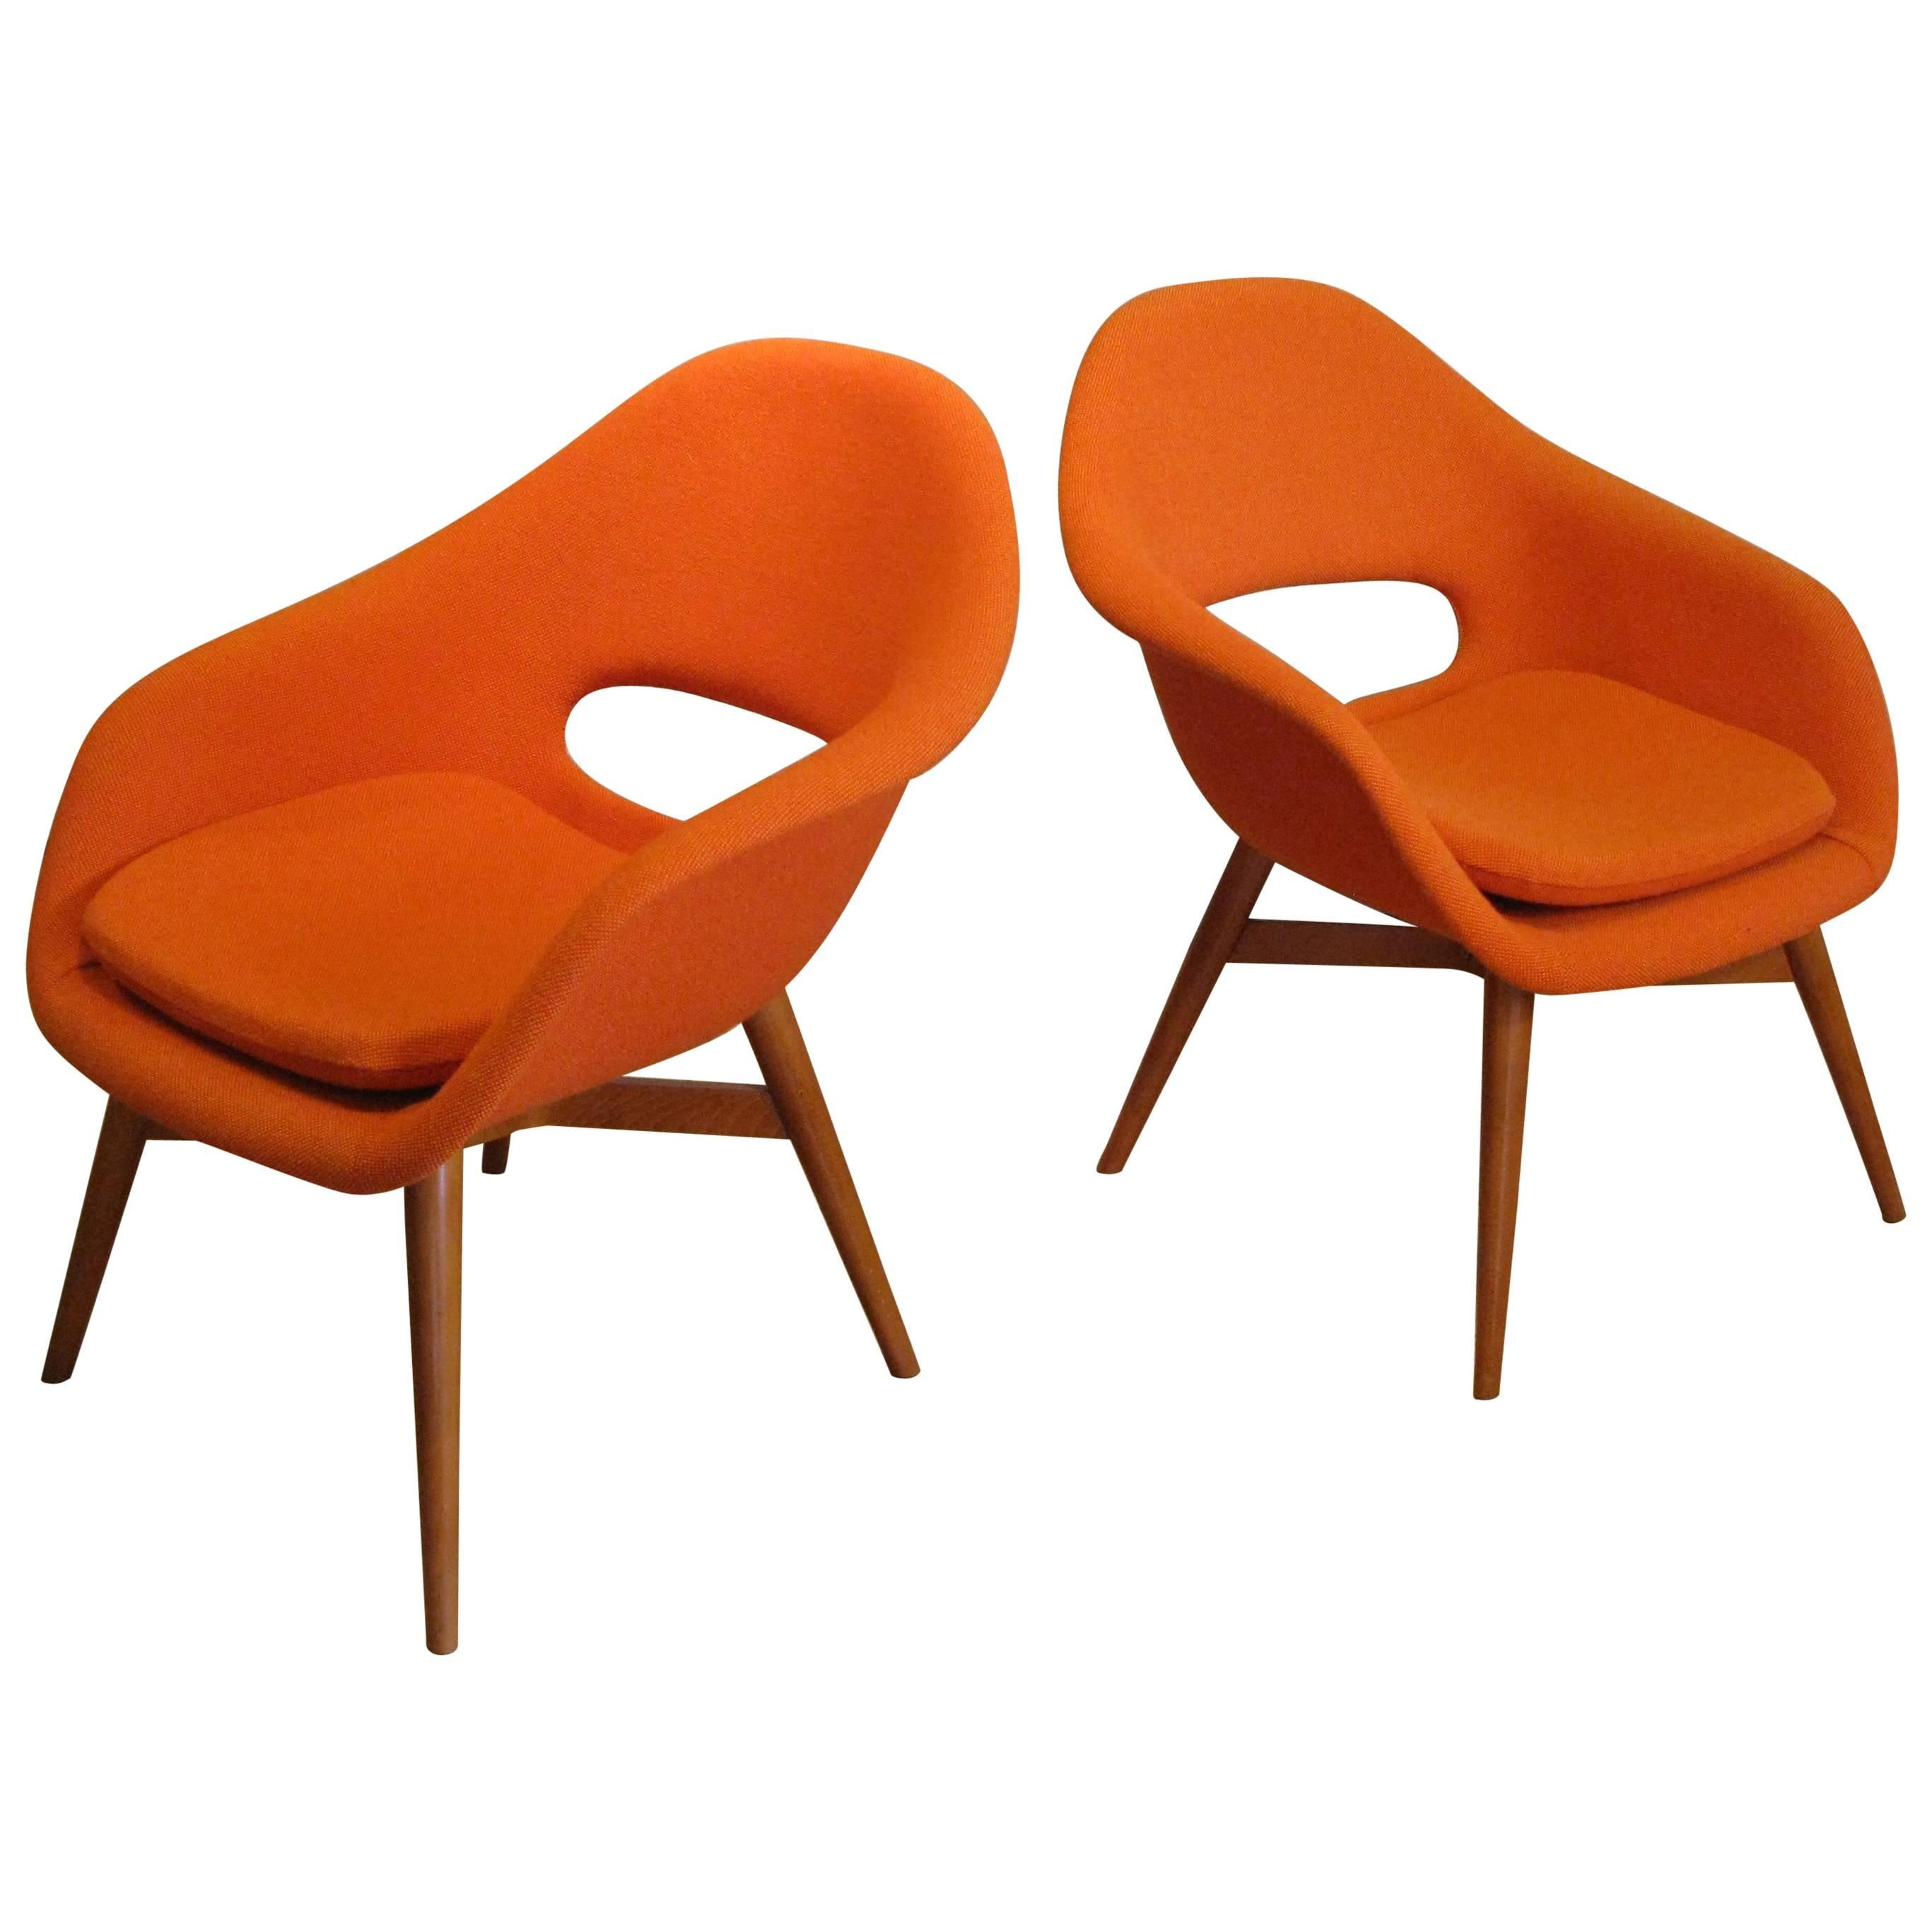 Pair of 1960s Lounge Chairs by Miroslav Navratil